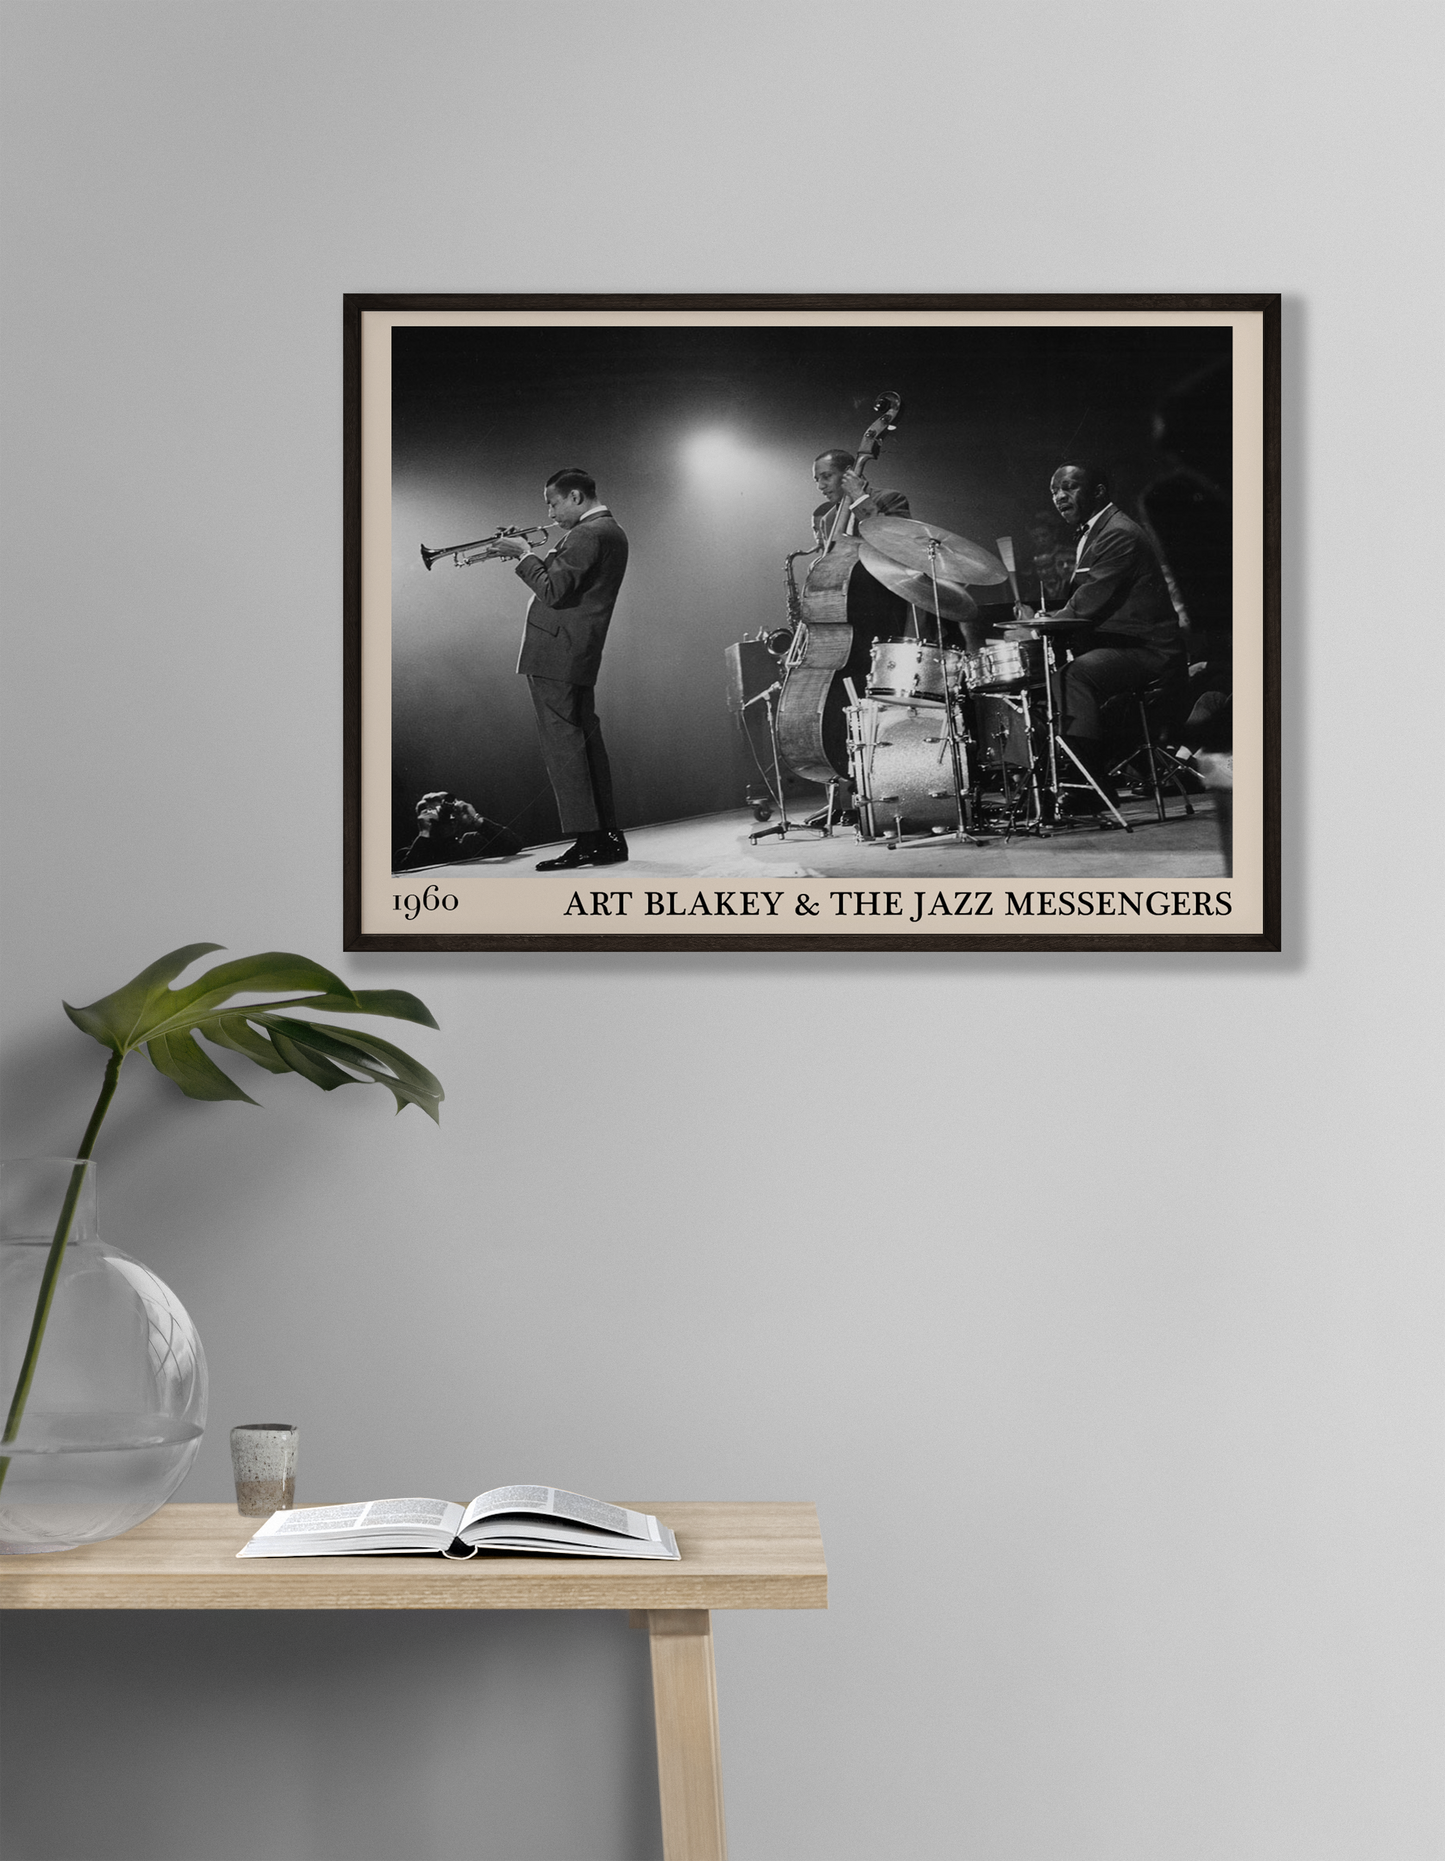 1960 framed jazz poster of Art Blakey & The Jazz Messengers hanging on a grey living room wall